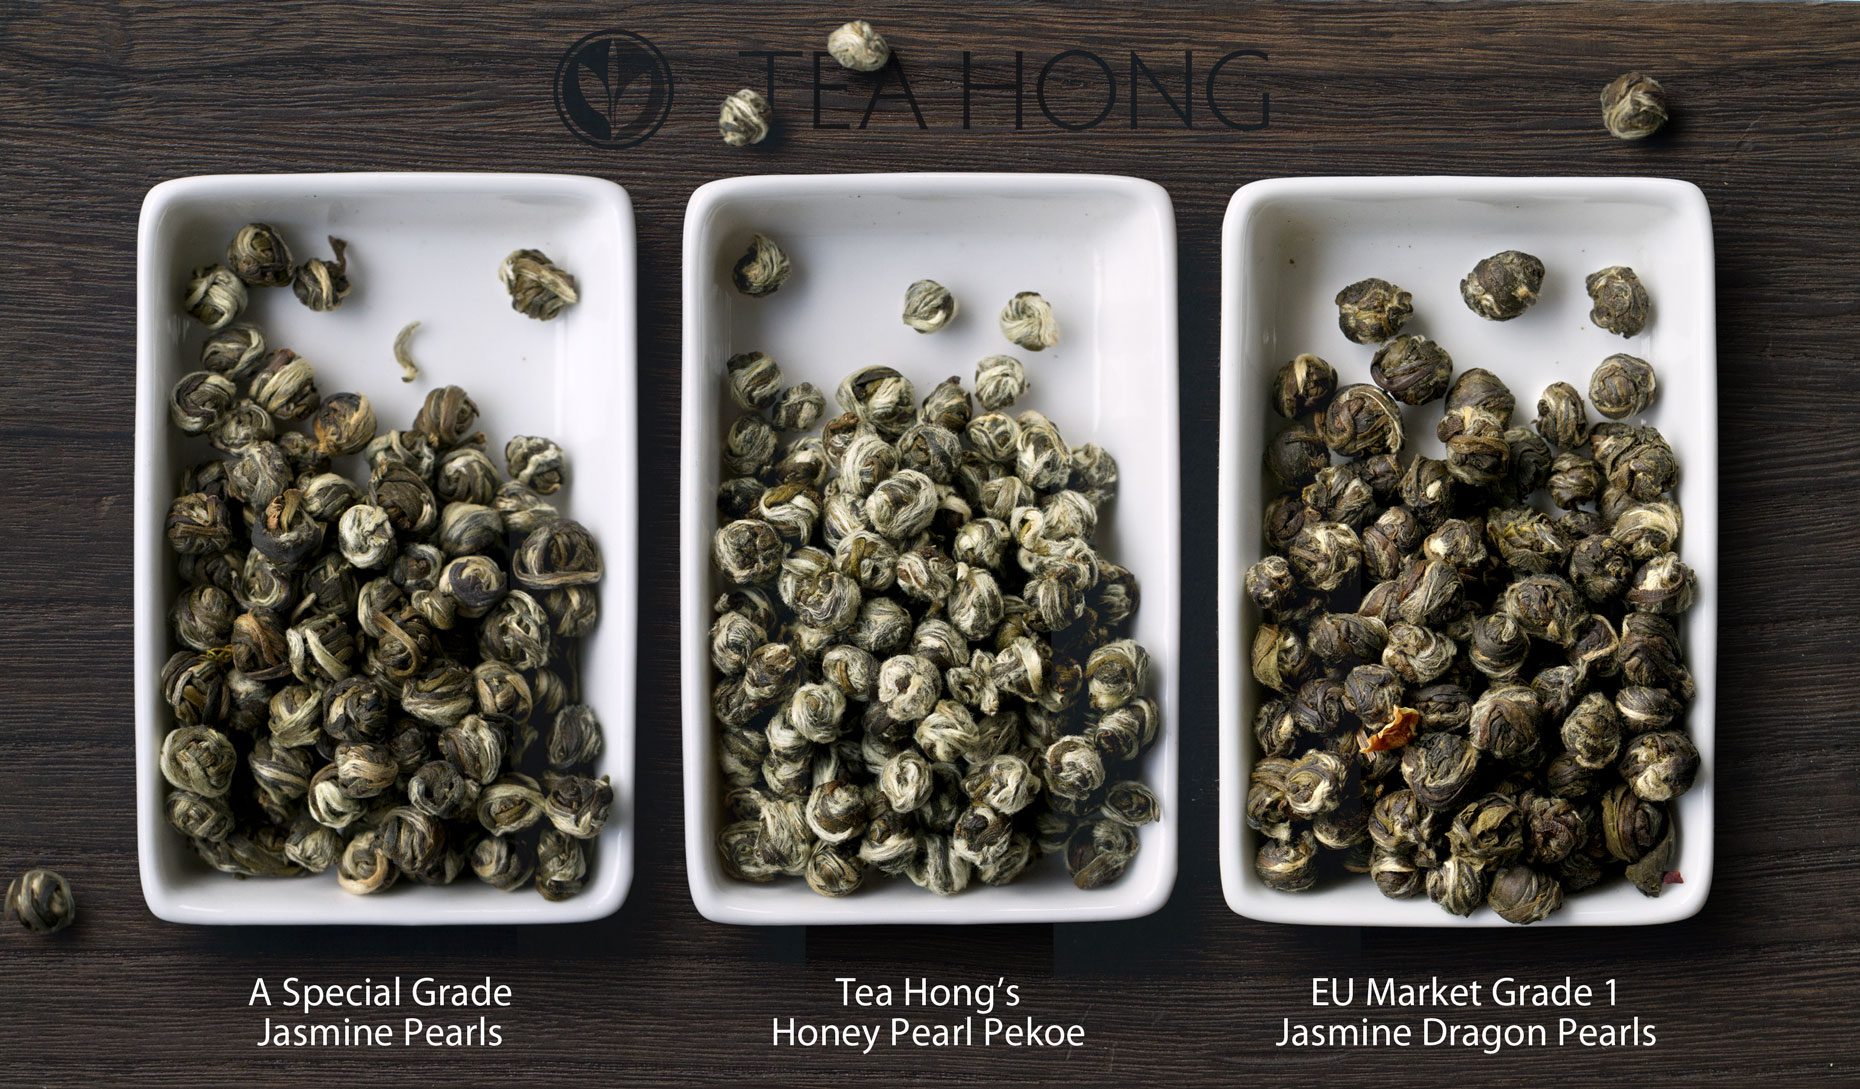 Comparing the tealeaves of two other jasmine pearls with that of Tea Hong's Honey Pearl Pekoe